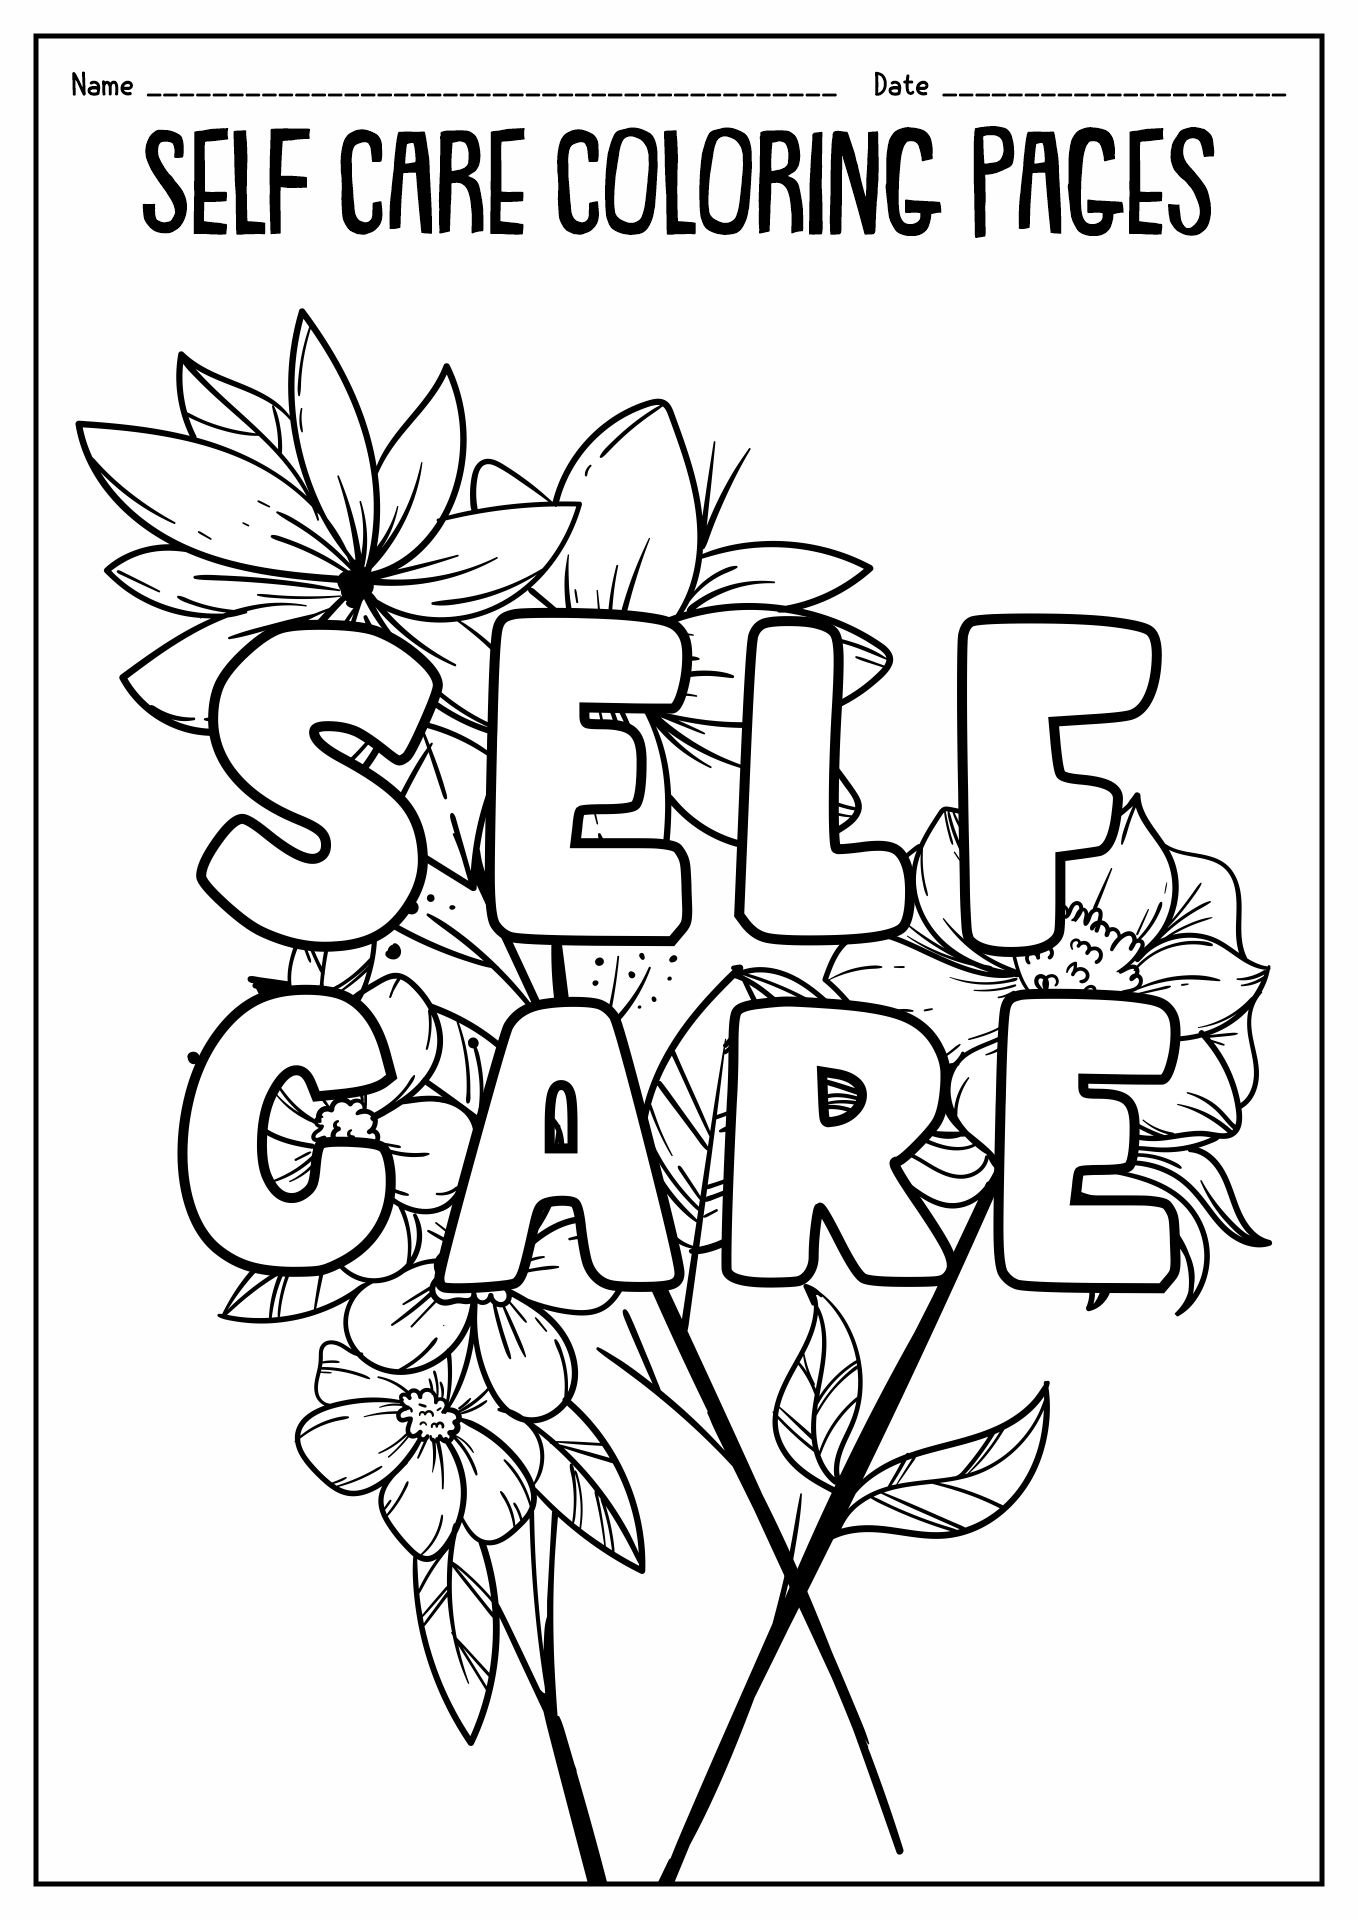 Self-Care Coloring Worksheets